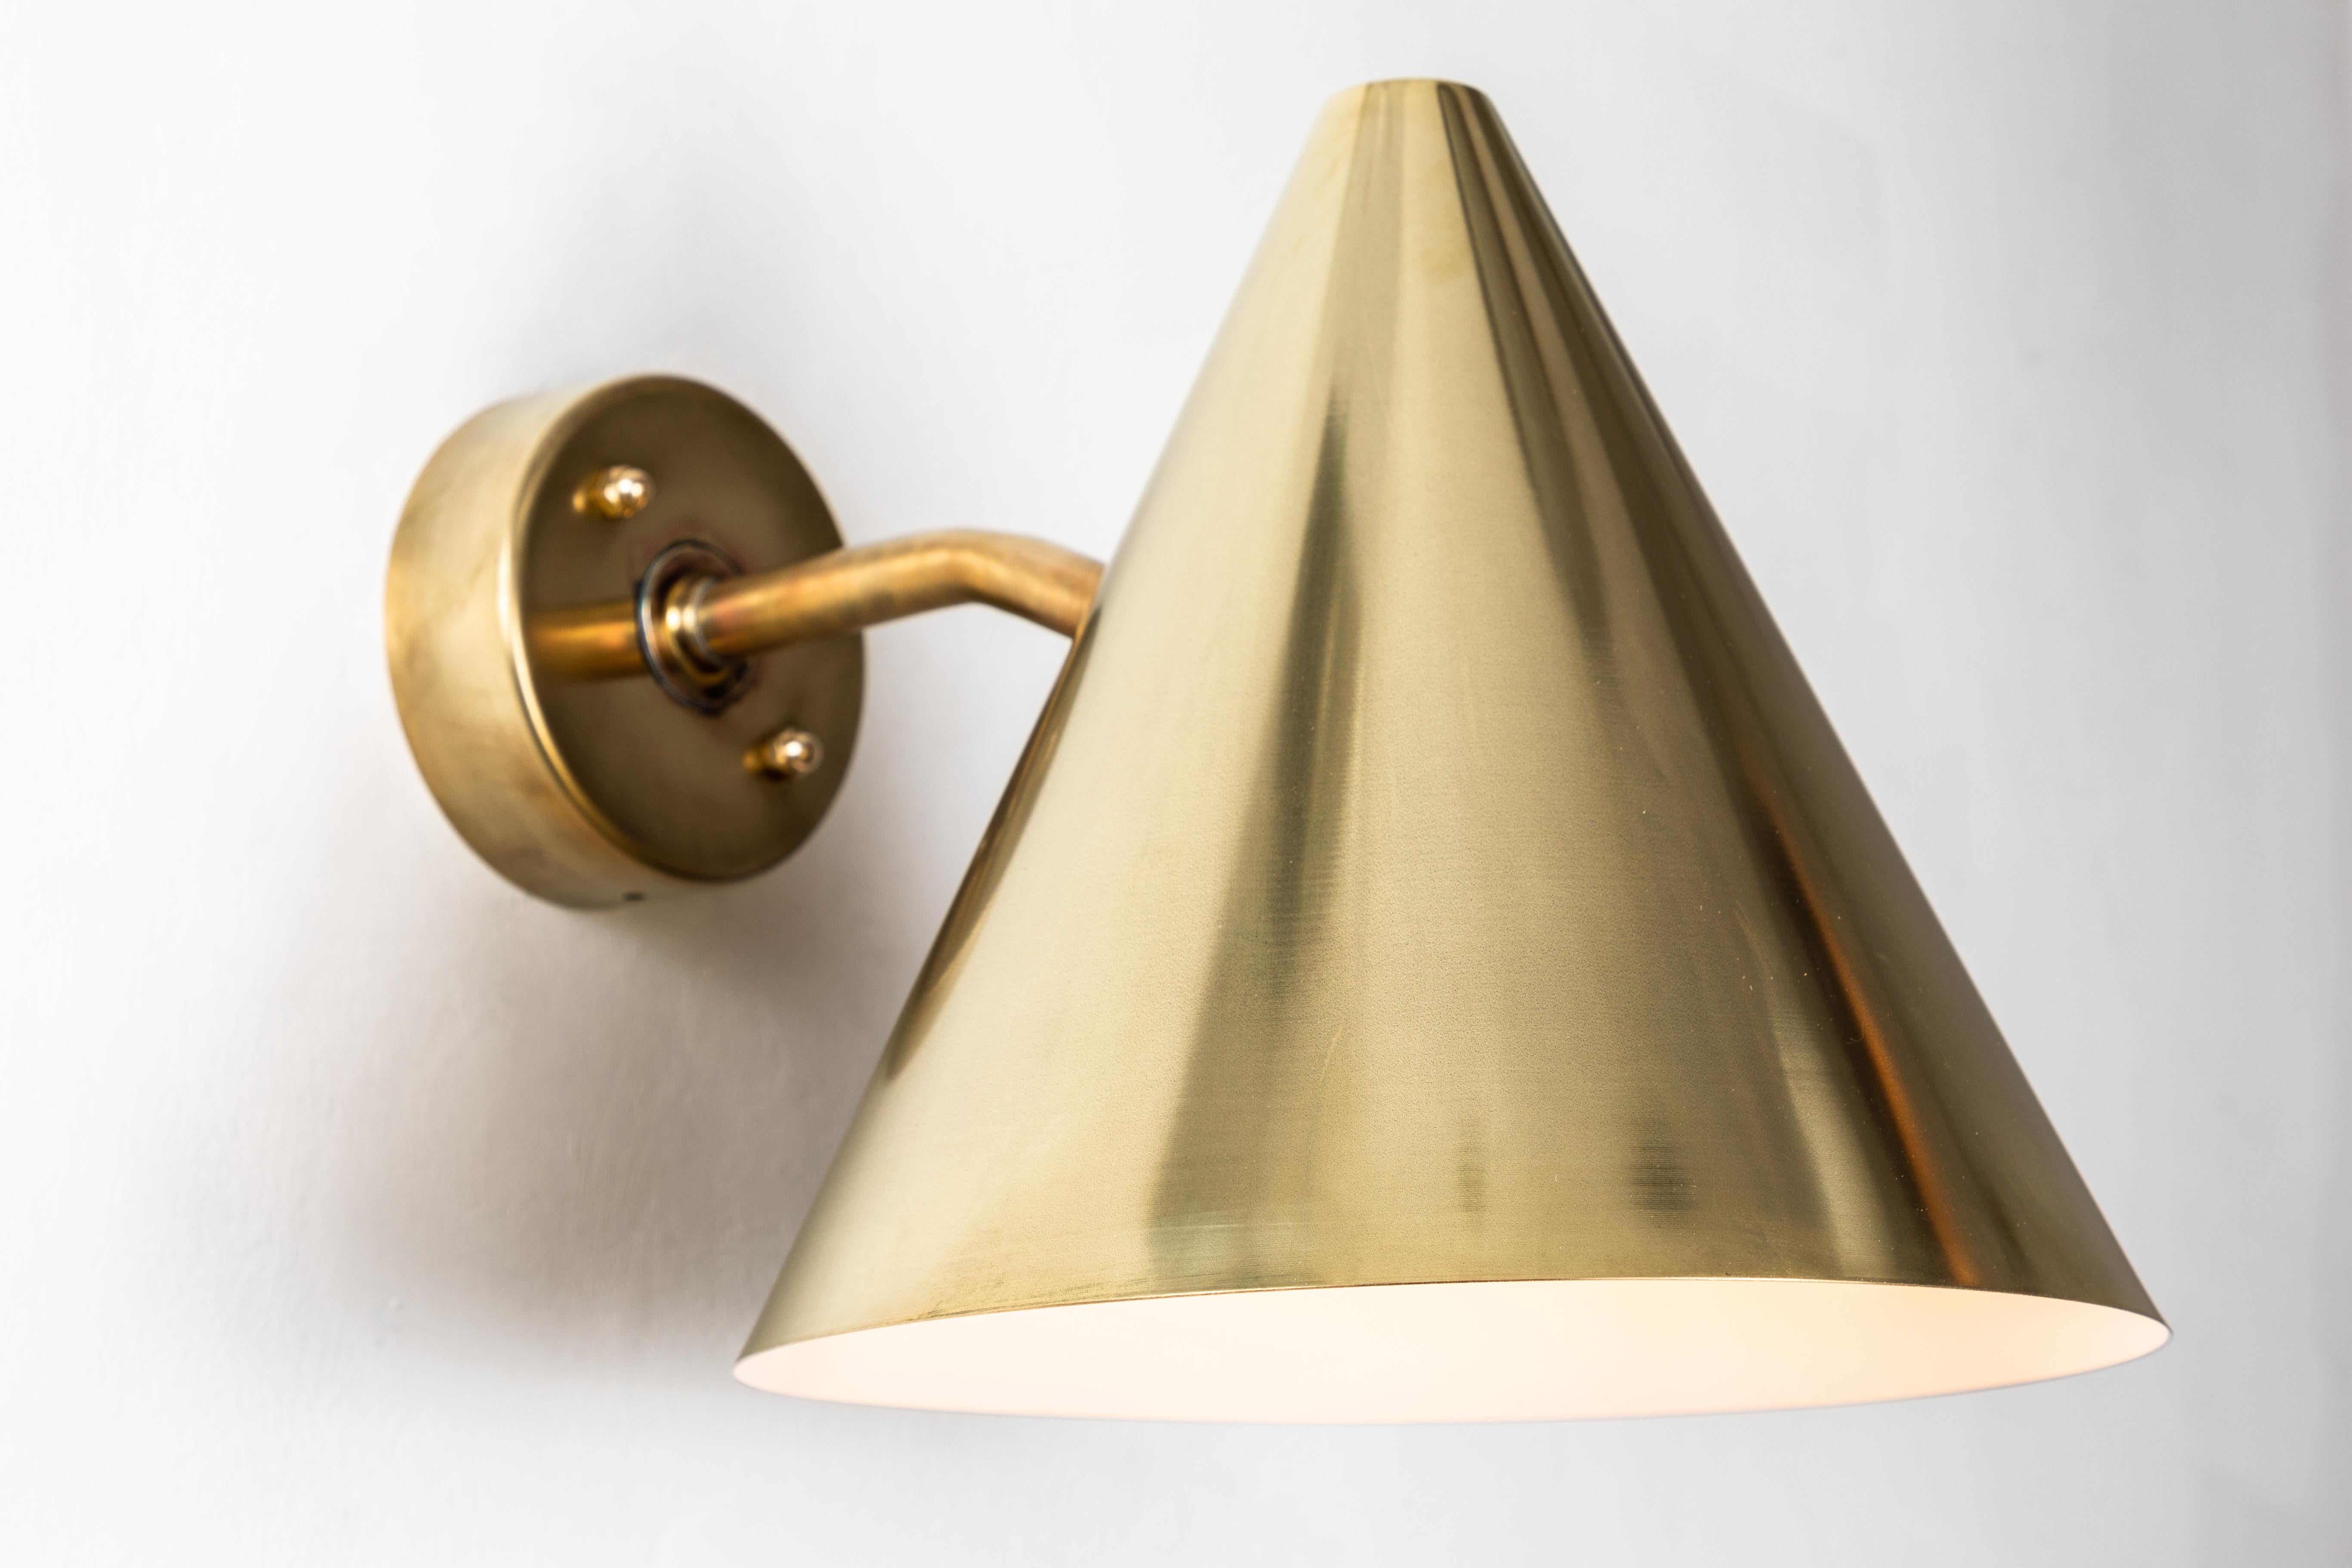 Pair of Hans-Agne Jakobsson 'Tratten' Raw brass outdoor sconces. An exclusive made for U.S. and UL listed authorized re-edition of the classic Swedish design executed in raw un-lacquered polished brass with white painted interior. Suitable for both